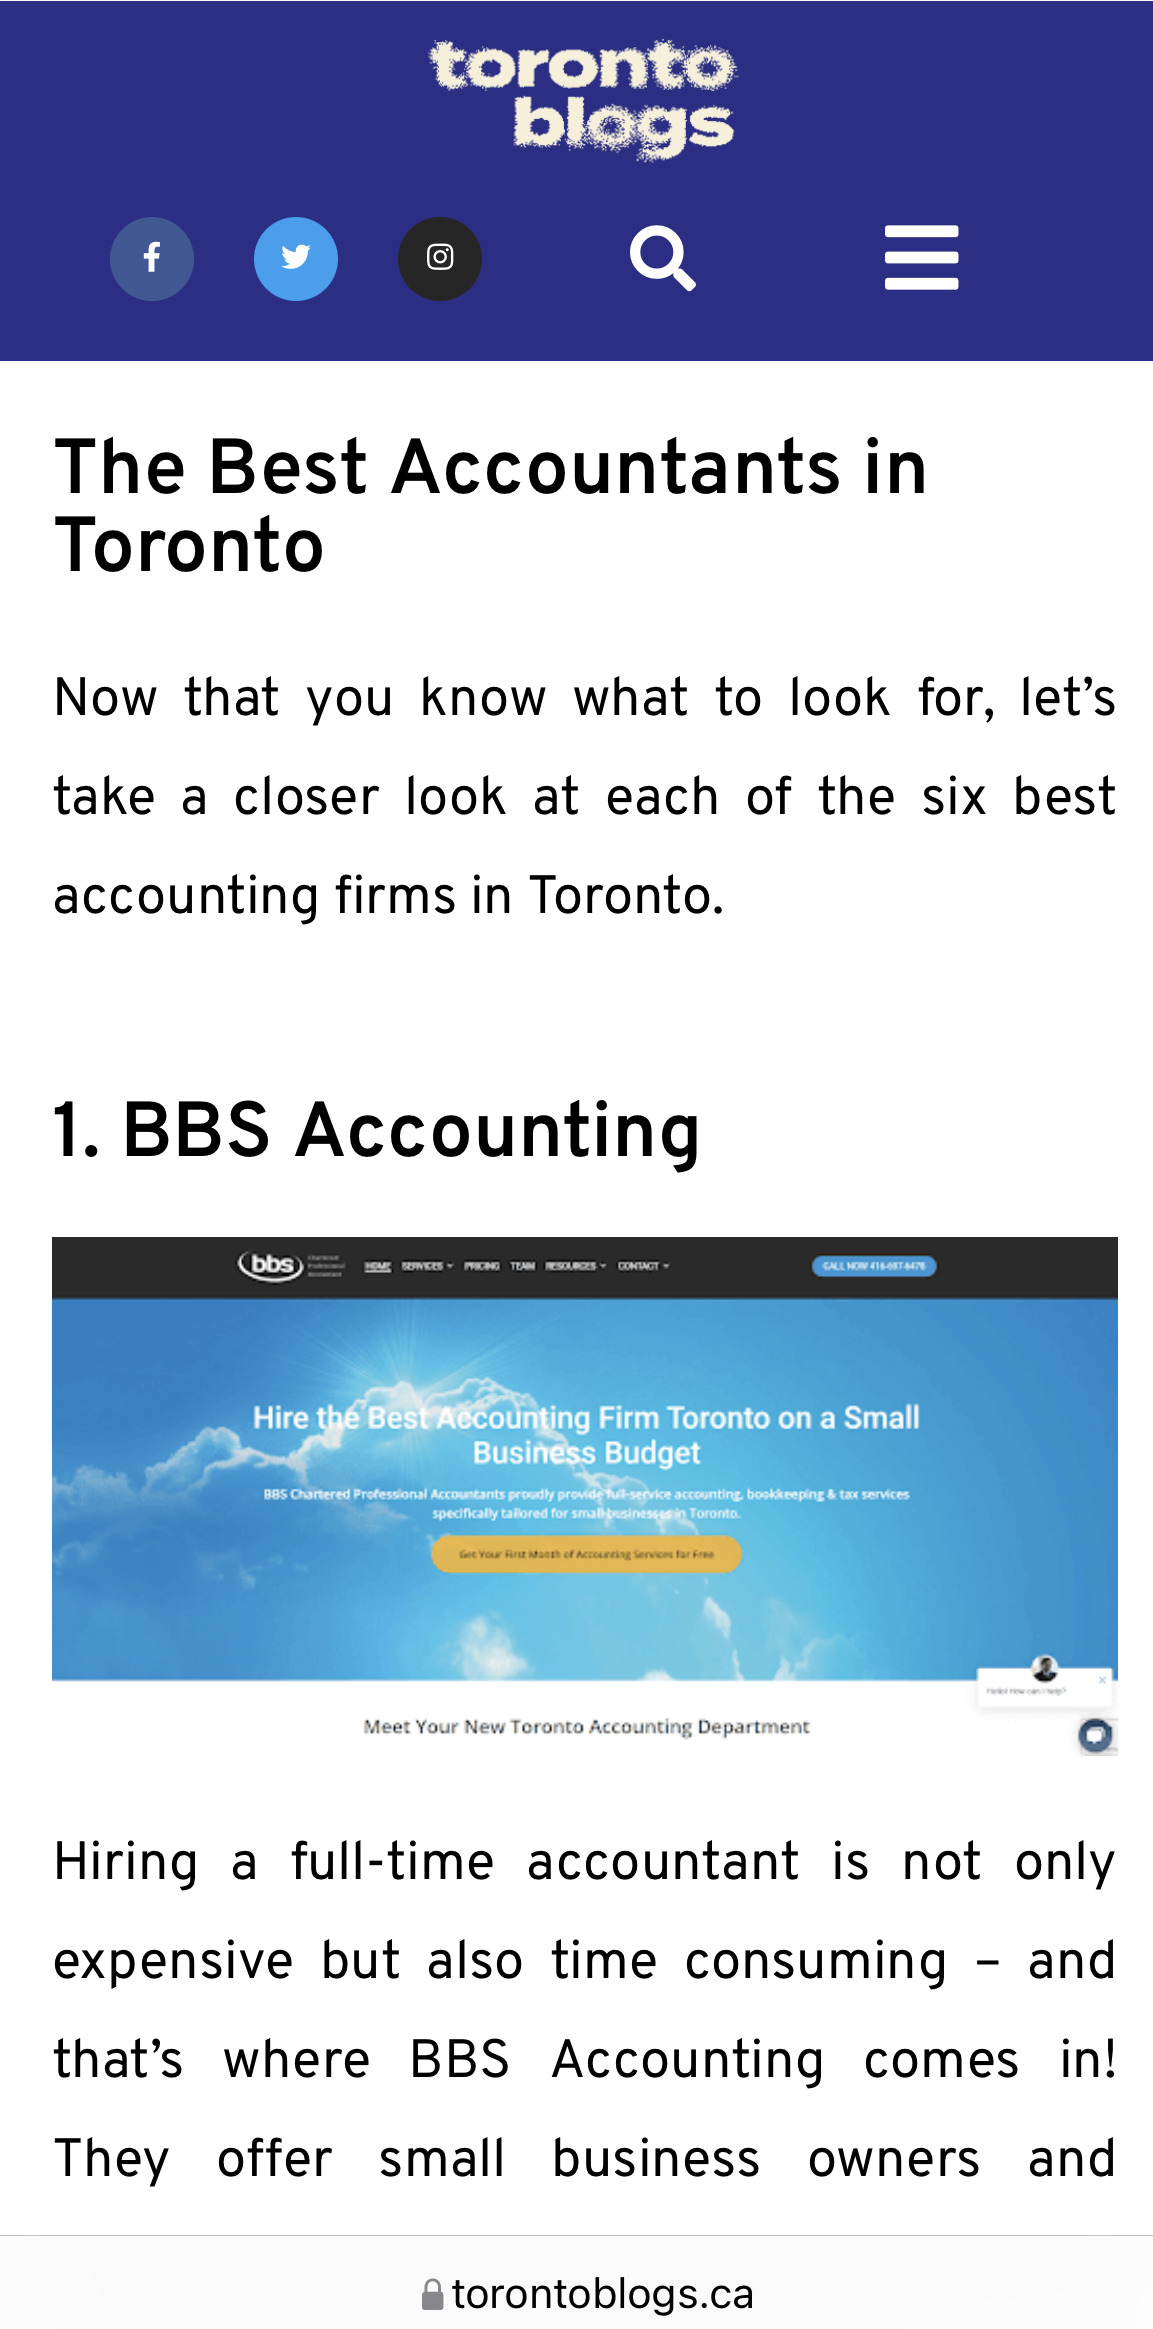 BBS Accounting CPA voted Top Accountant in Toronto 2022